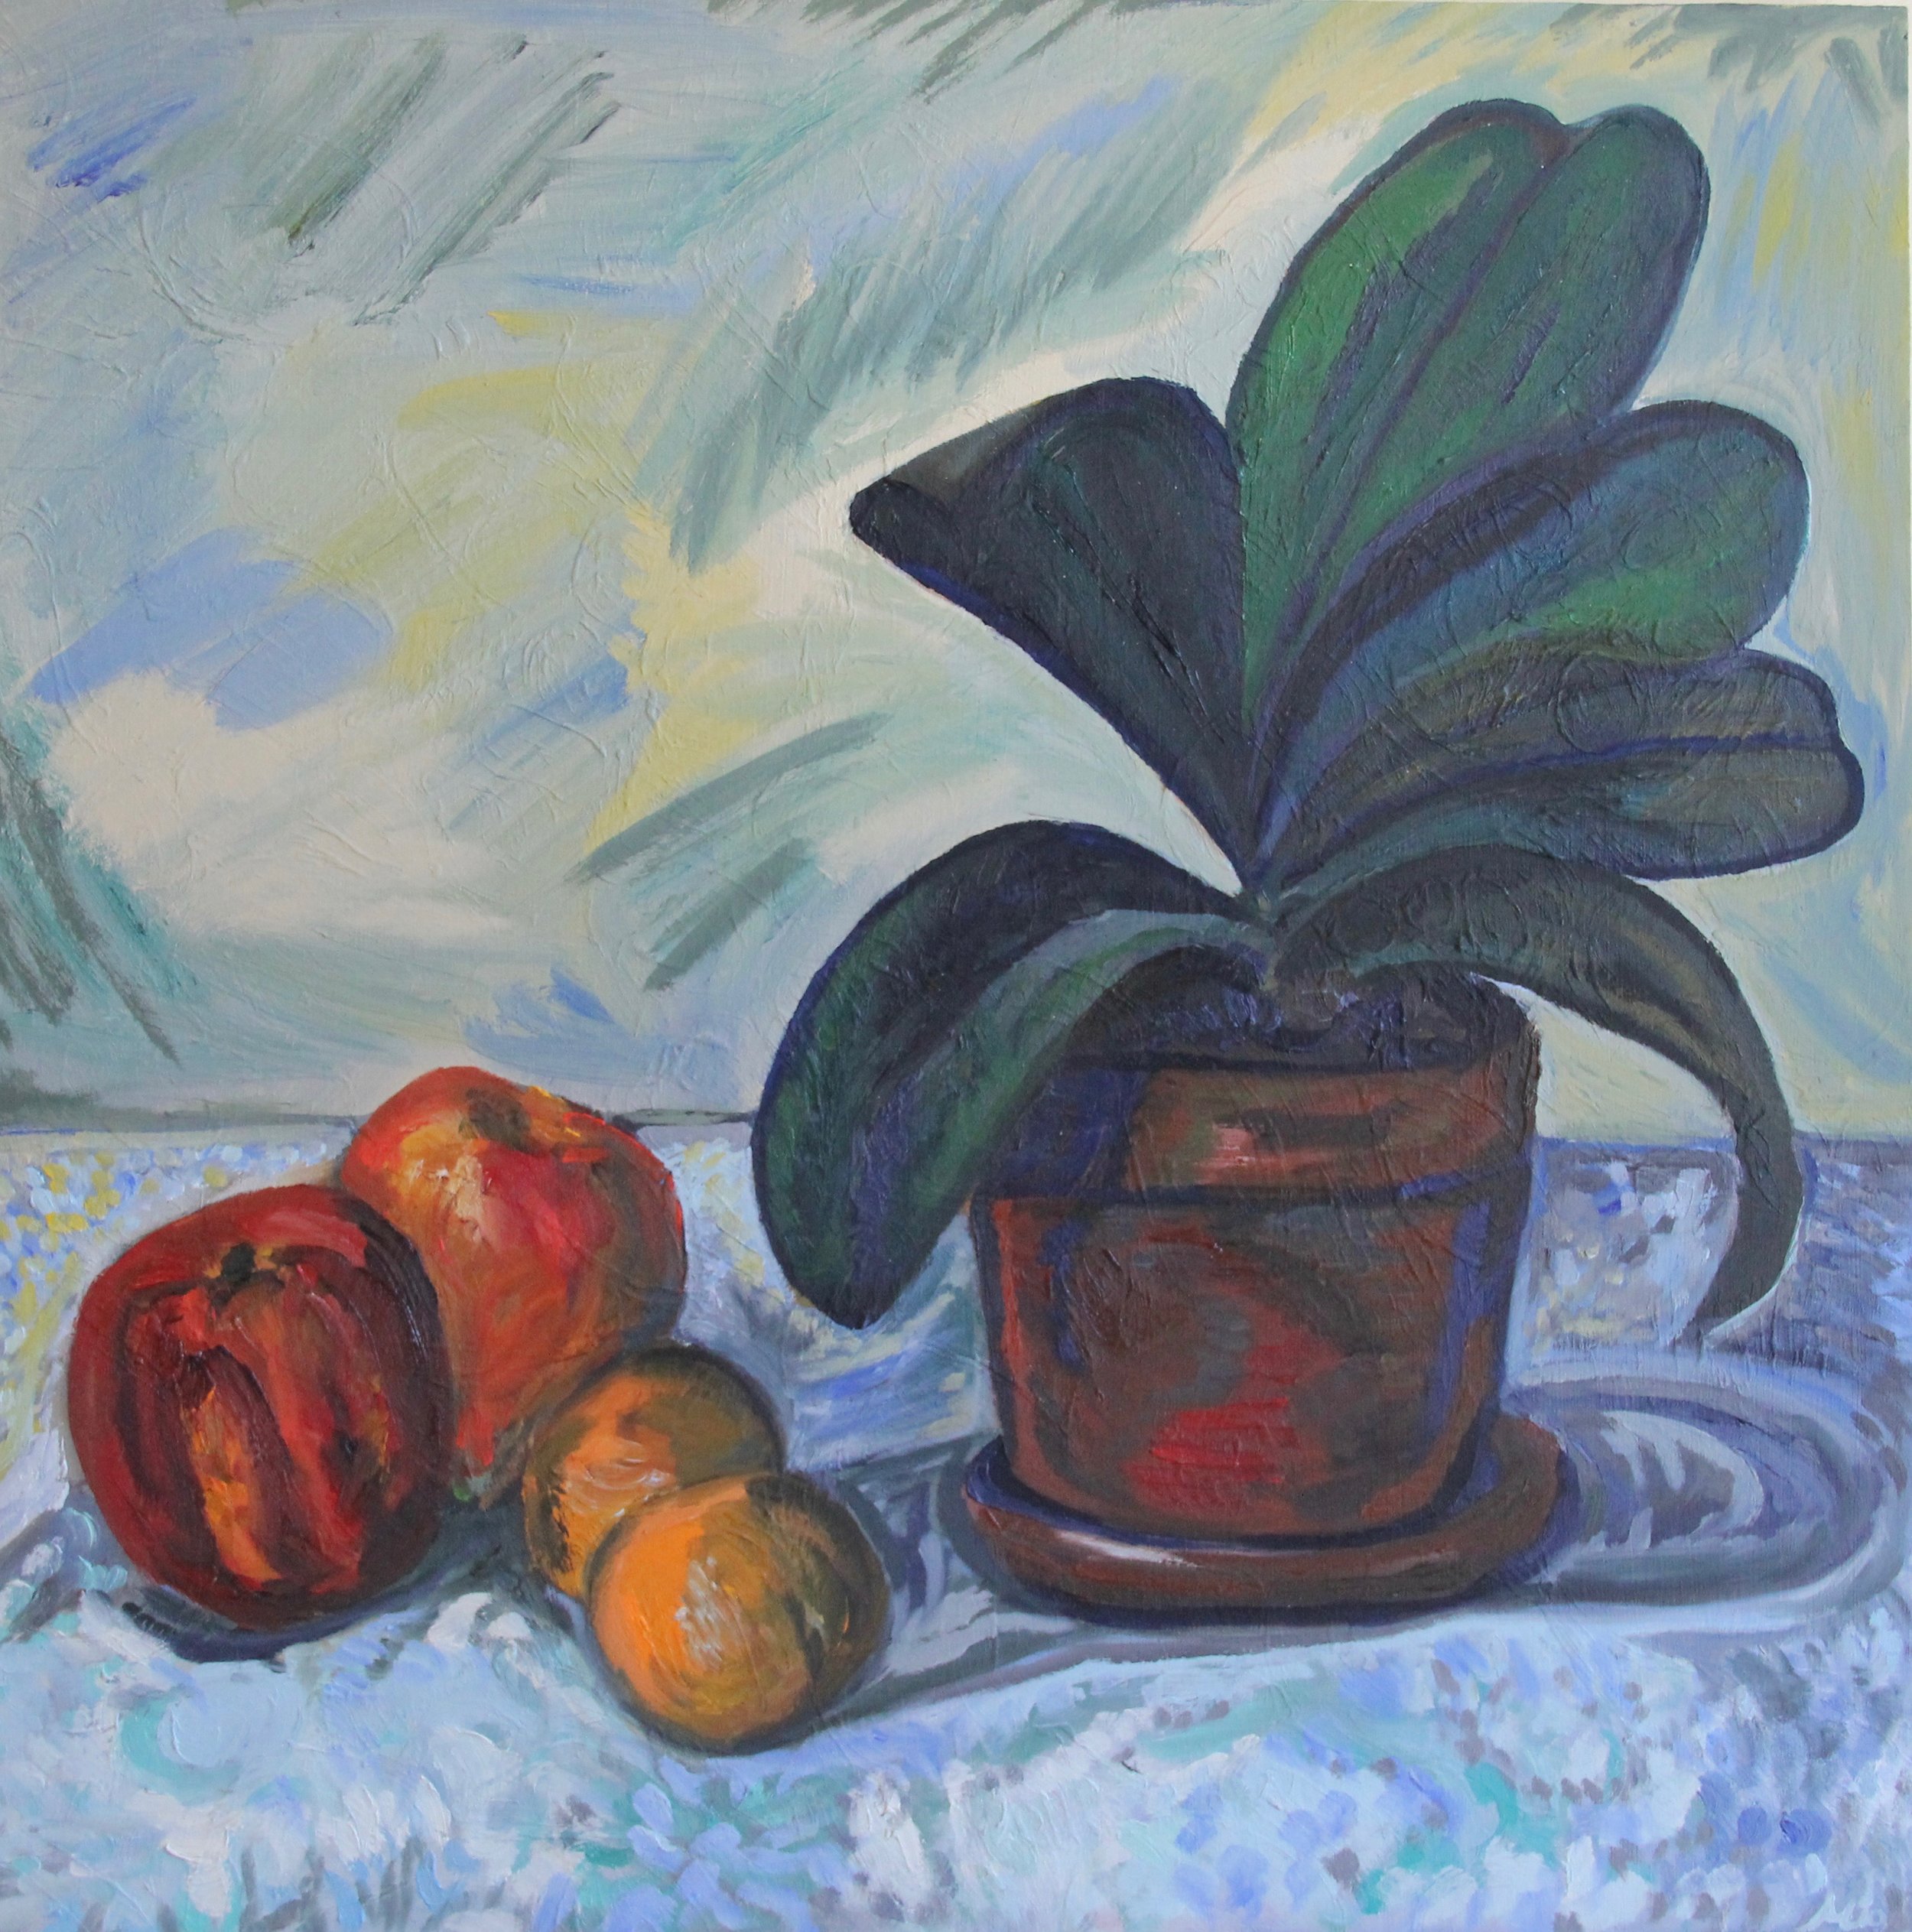 Orchid and Fruits 2, 2015